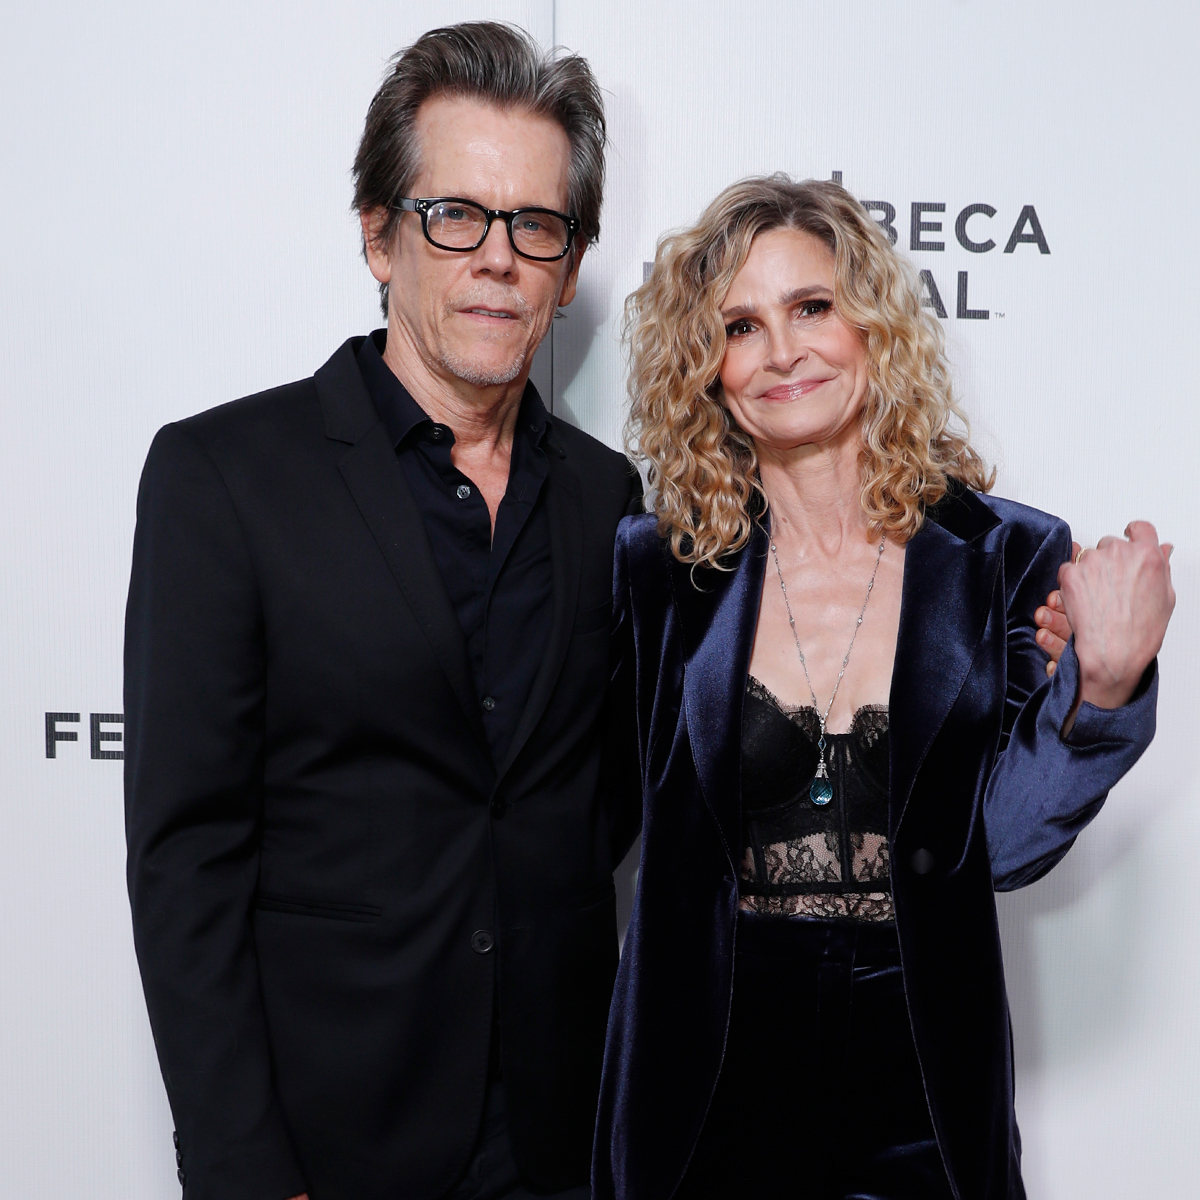 How Kyra Sedgwick Made Kevin Bacon’s 65th Birthday a “Perfect Day”